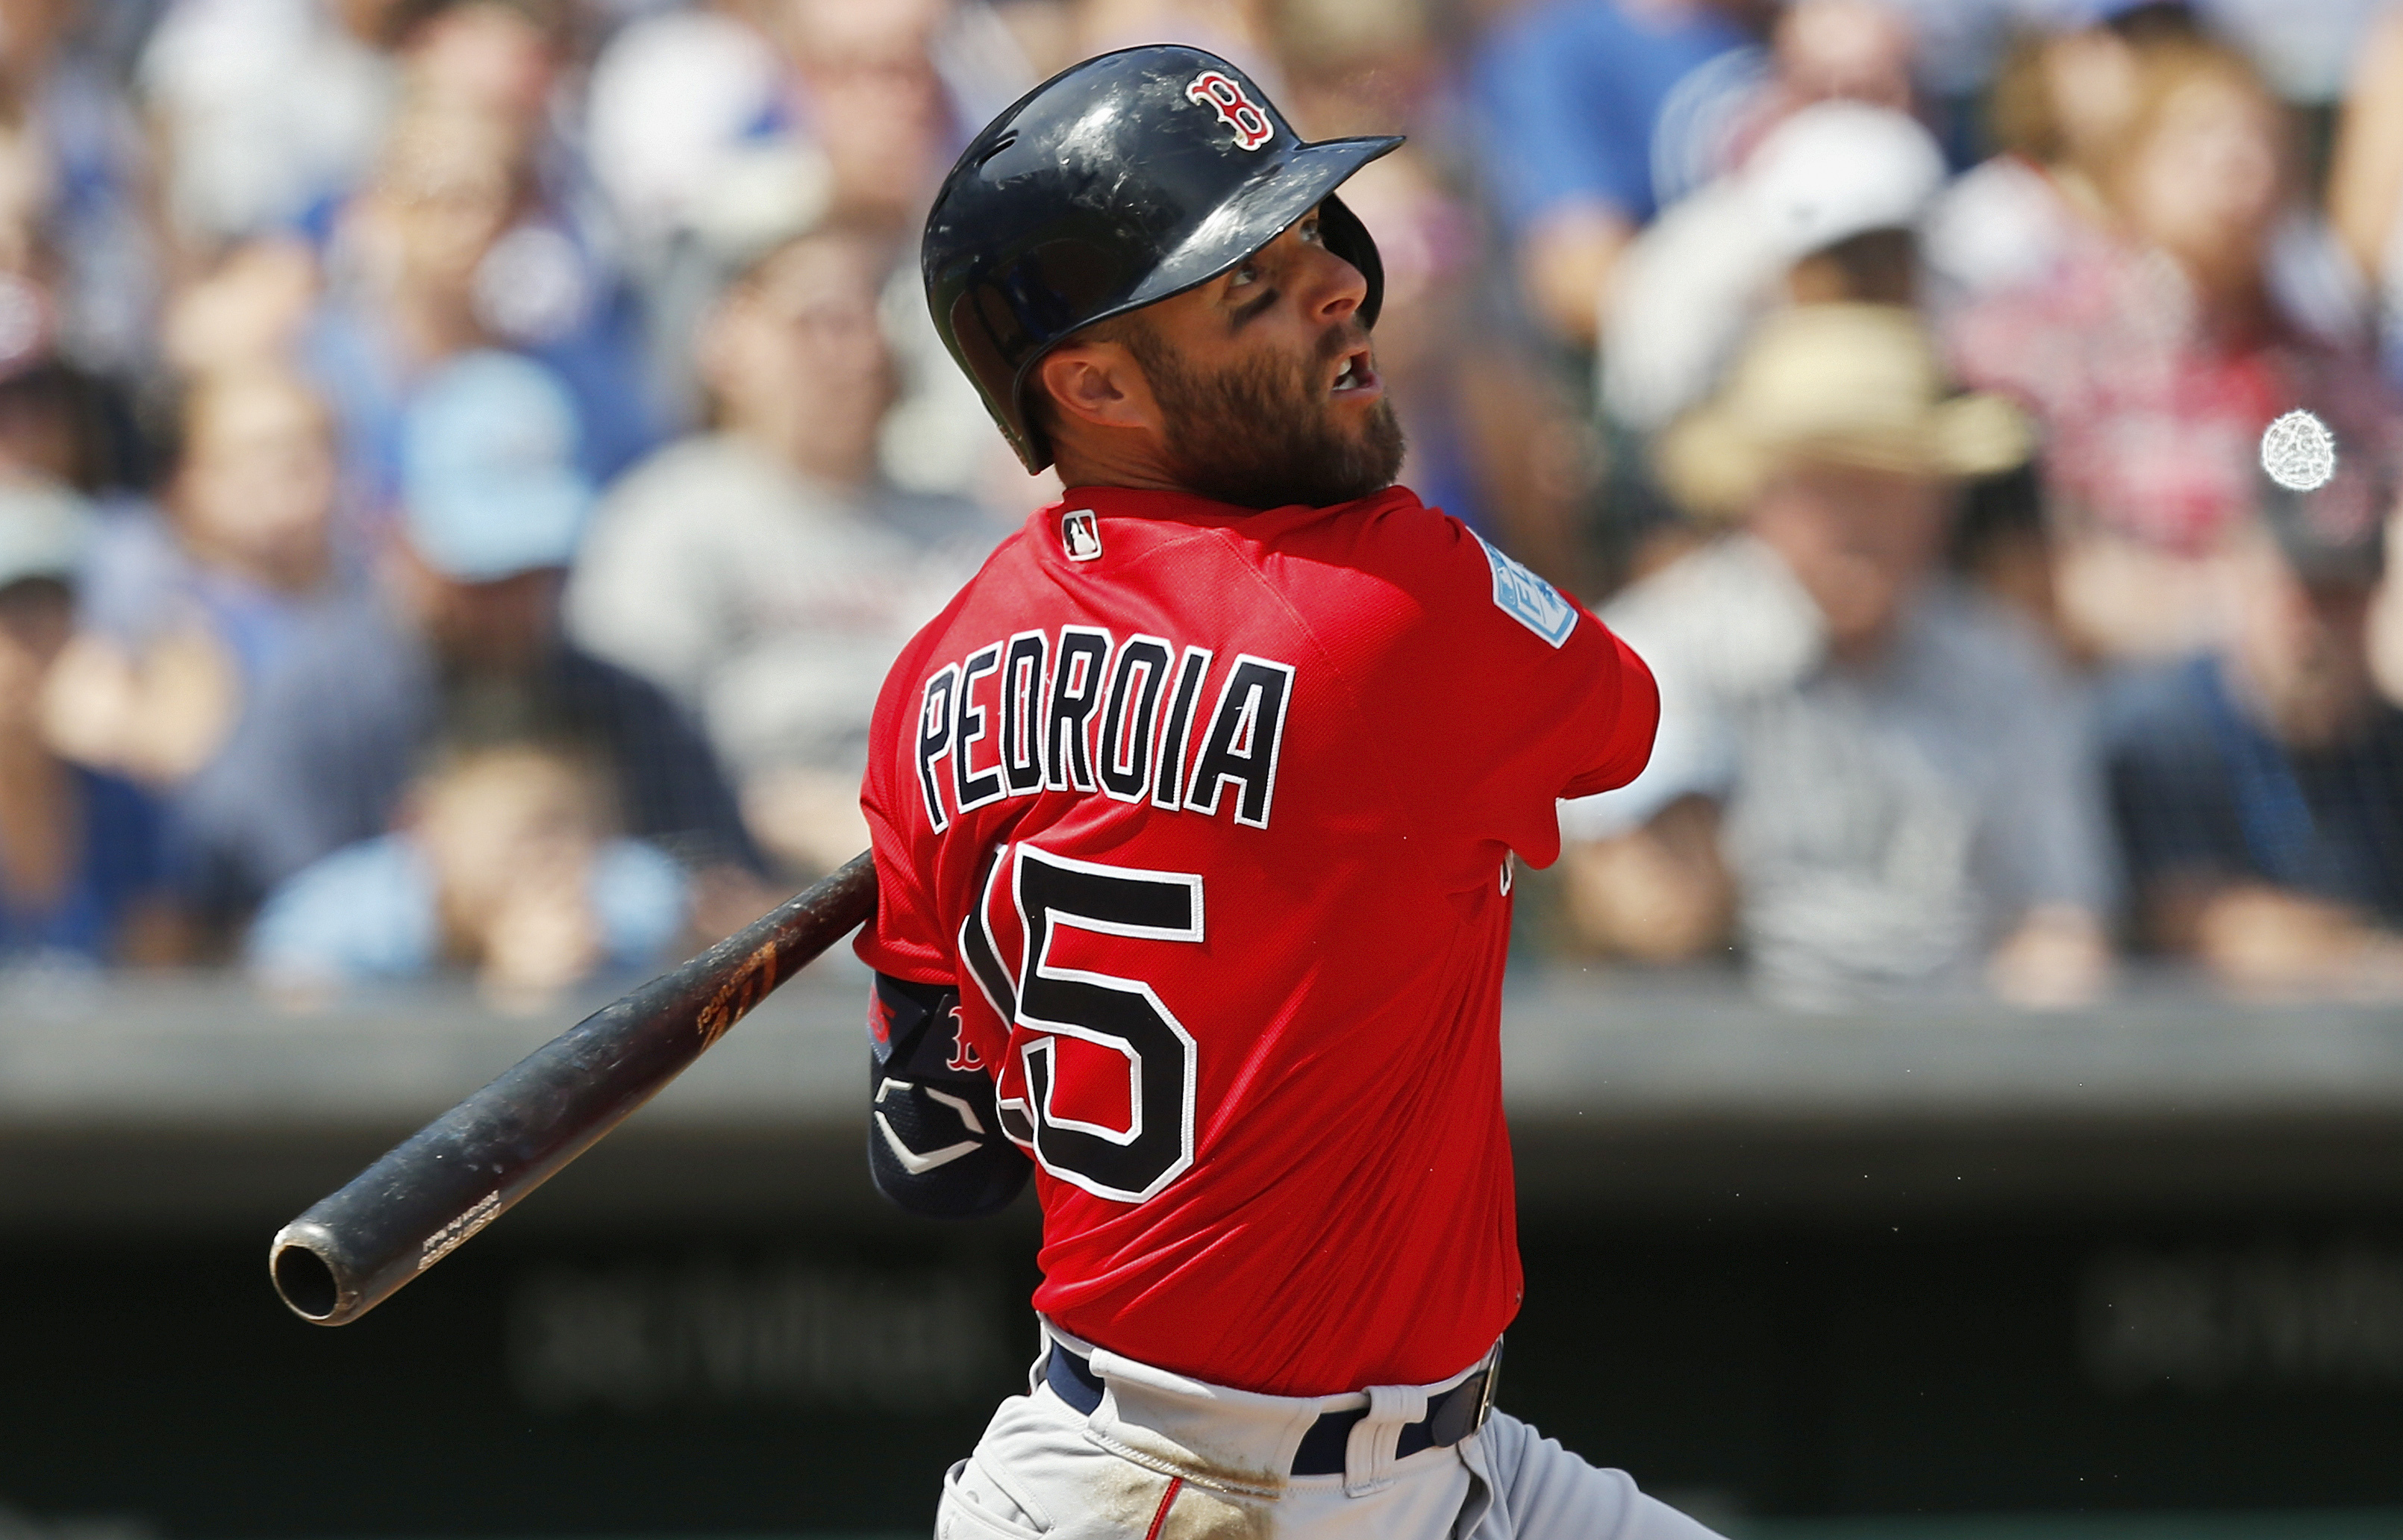 Boston's Pedroia could be activated for home opener